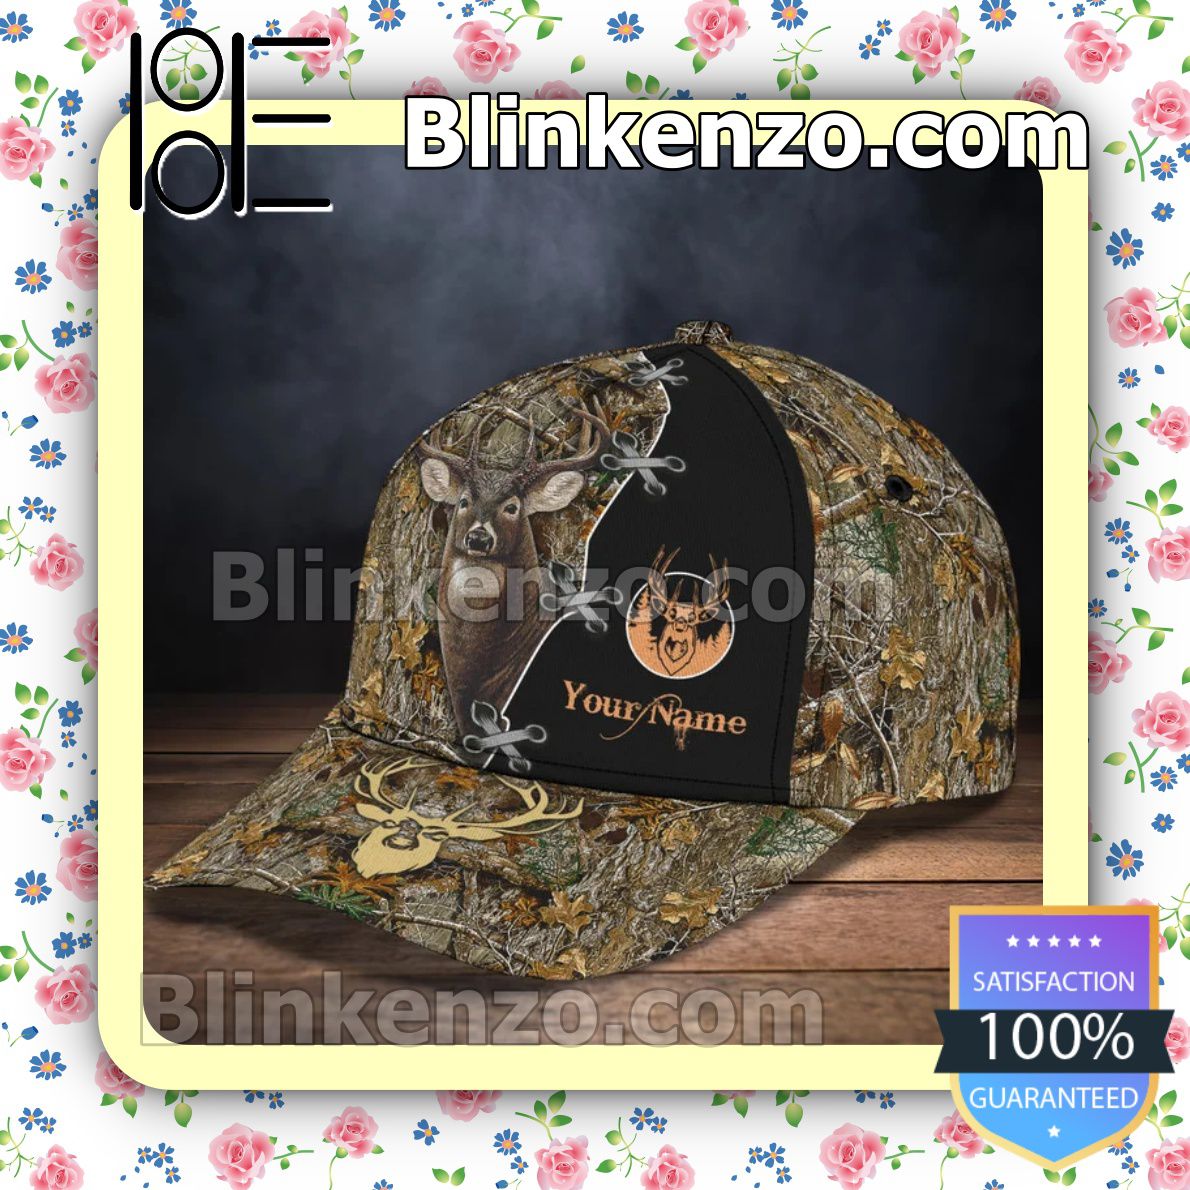 Print On Demand Personalized Deer Hunting Realtree Baseball Caps Gift For Boyfriend